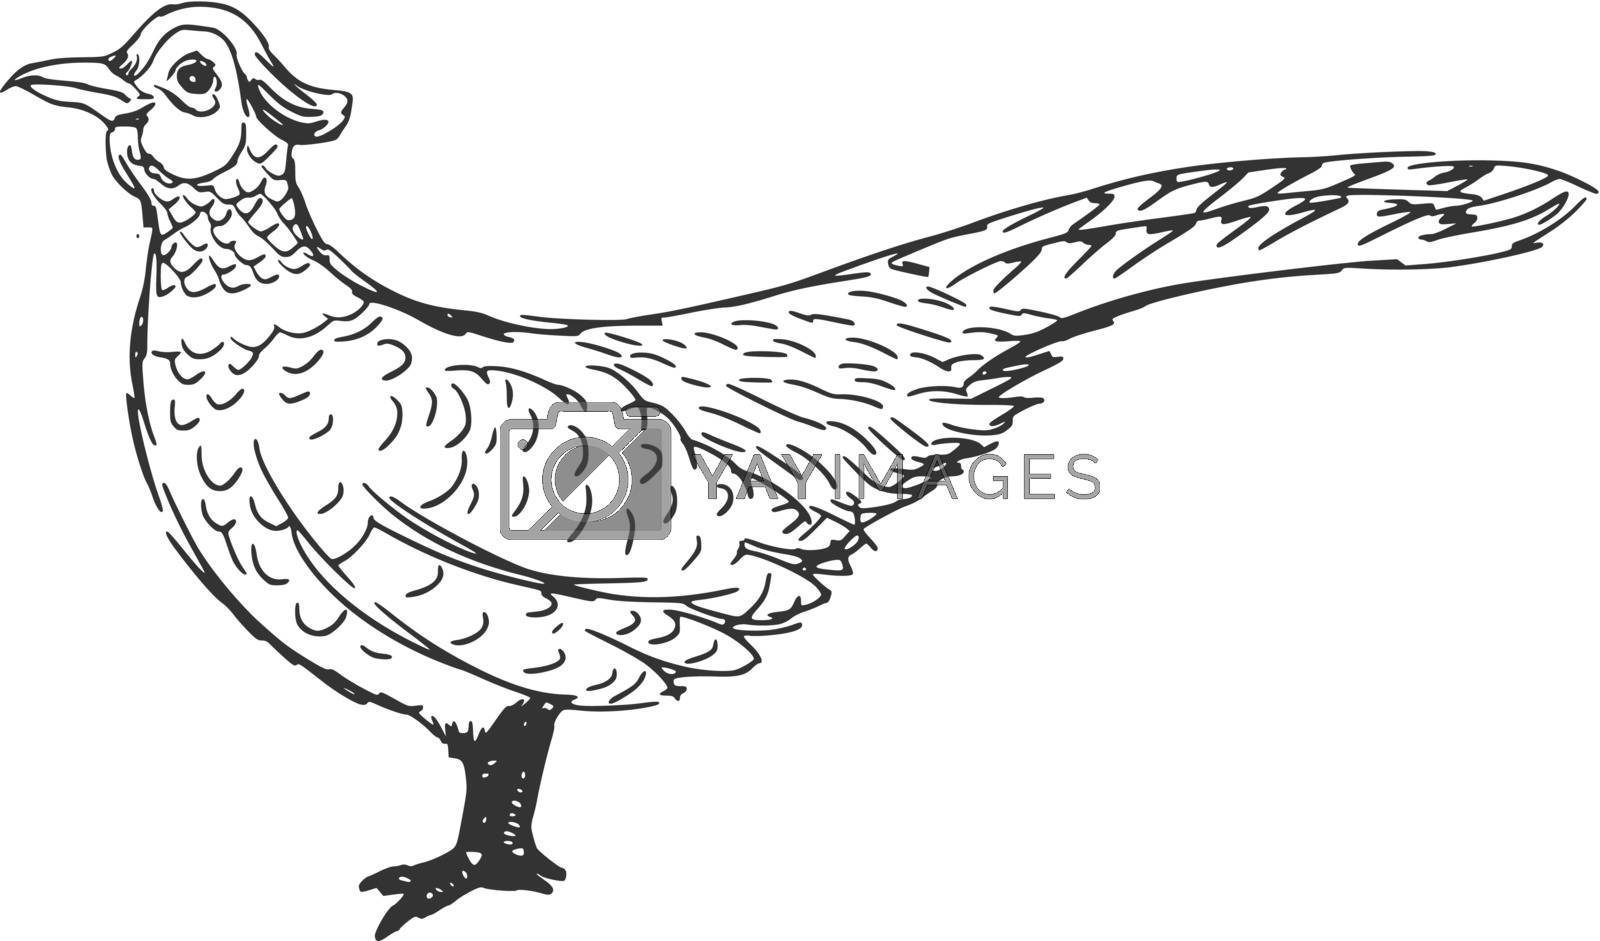 Royalty free image of pheasant by Perysty